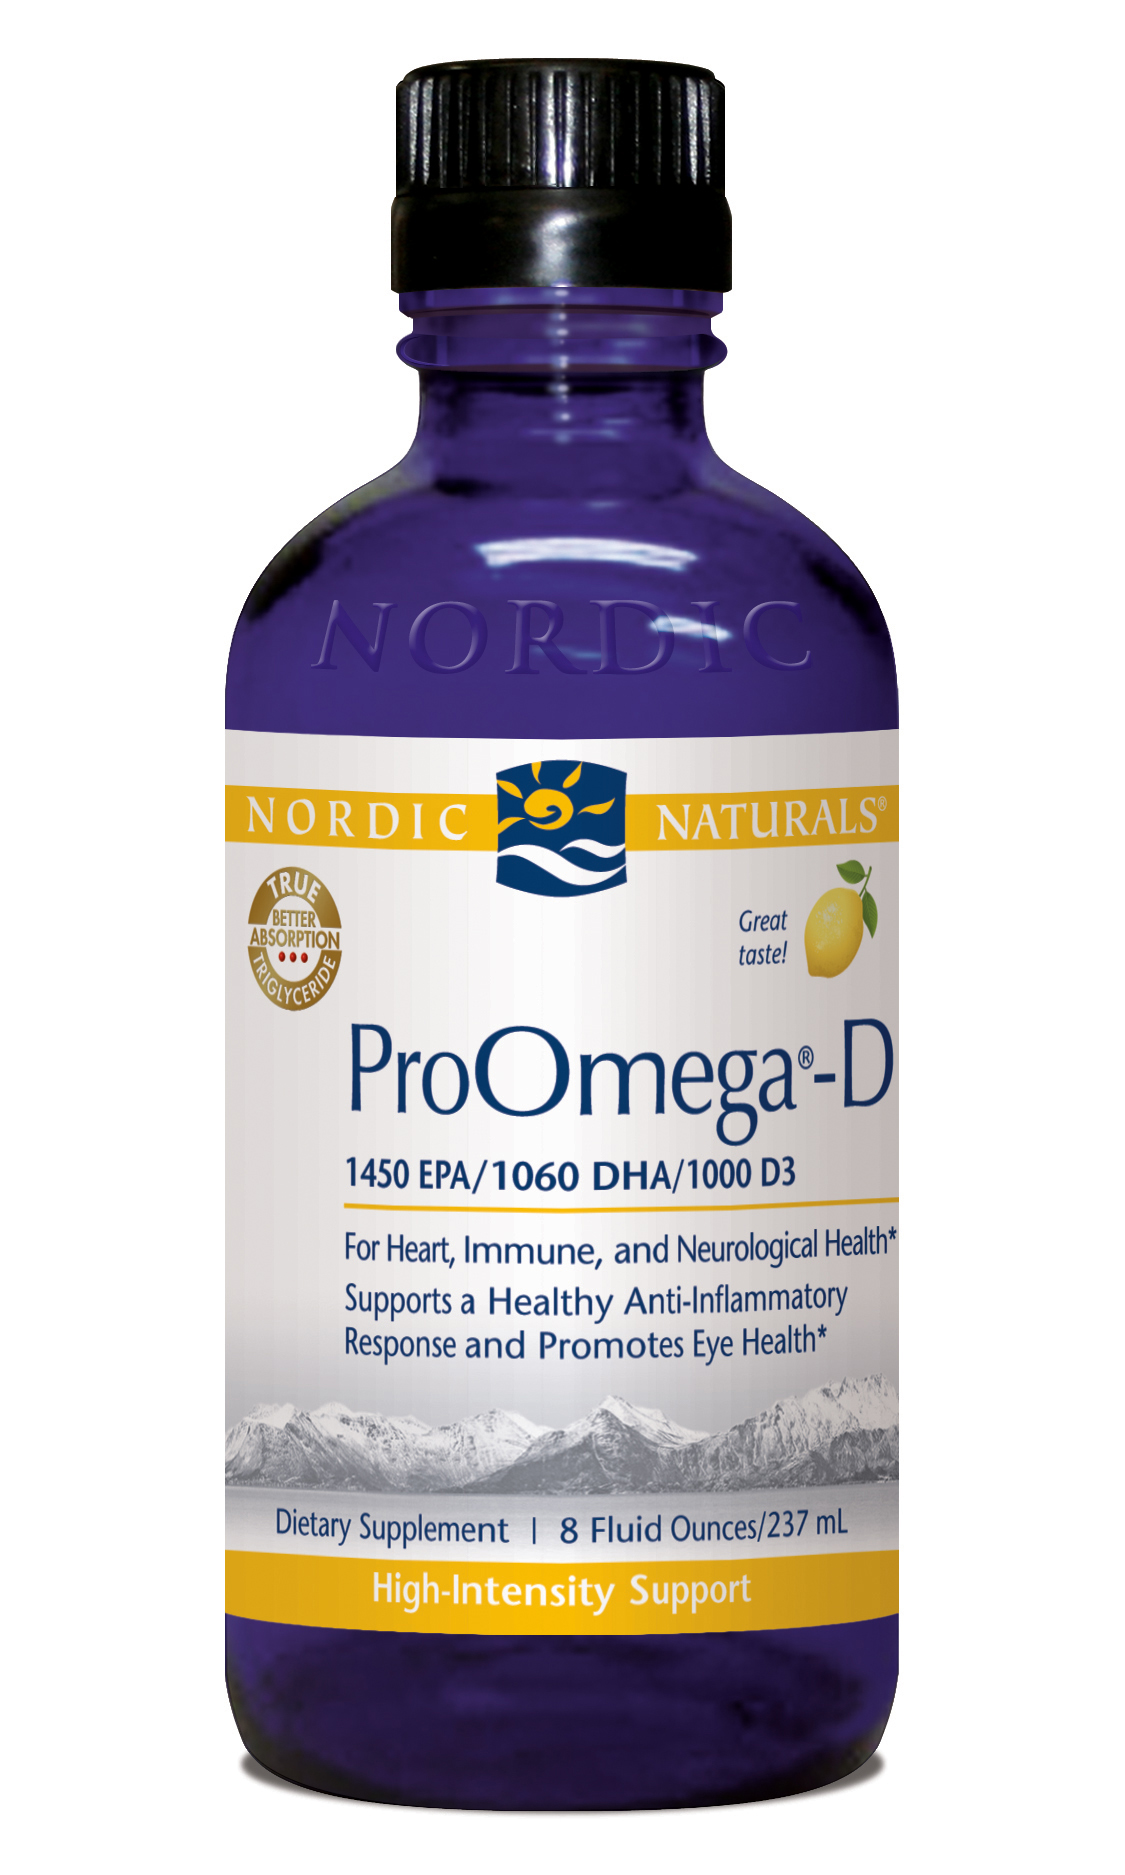 ProOmega-D Liquid from Nordic Naturals nourishes the body with essential Omega-3s and Vitamin D3..